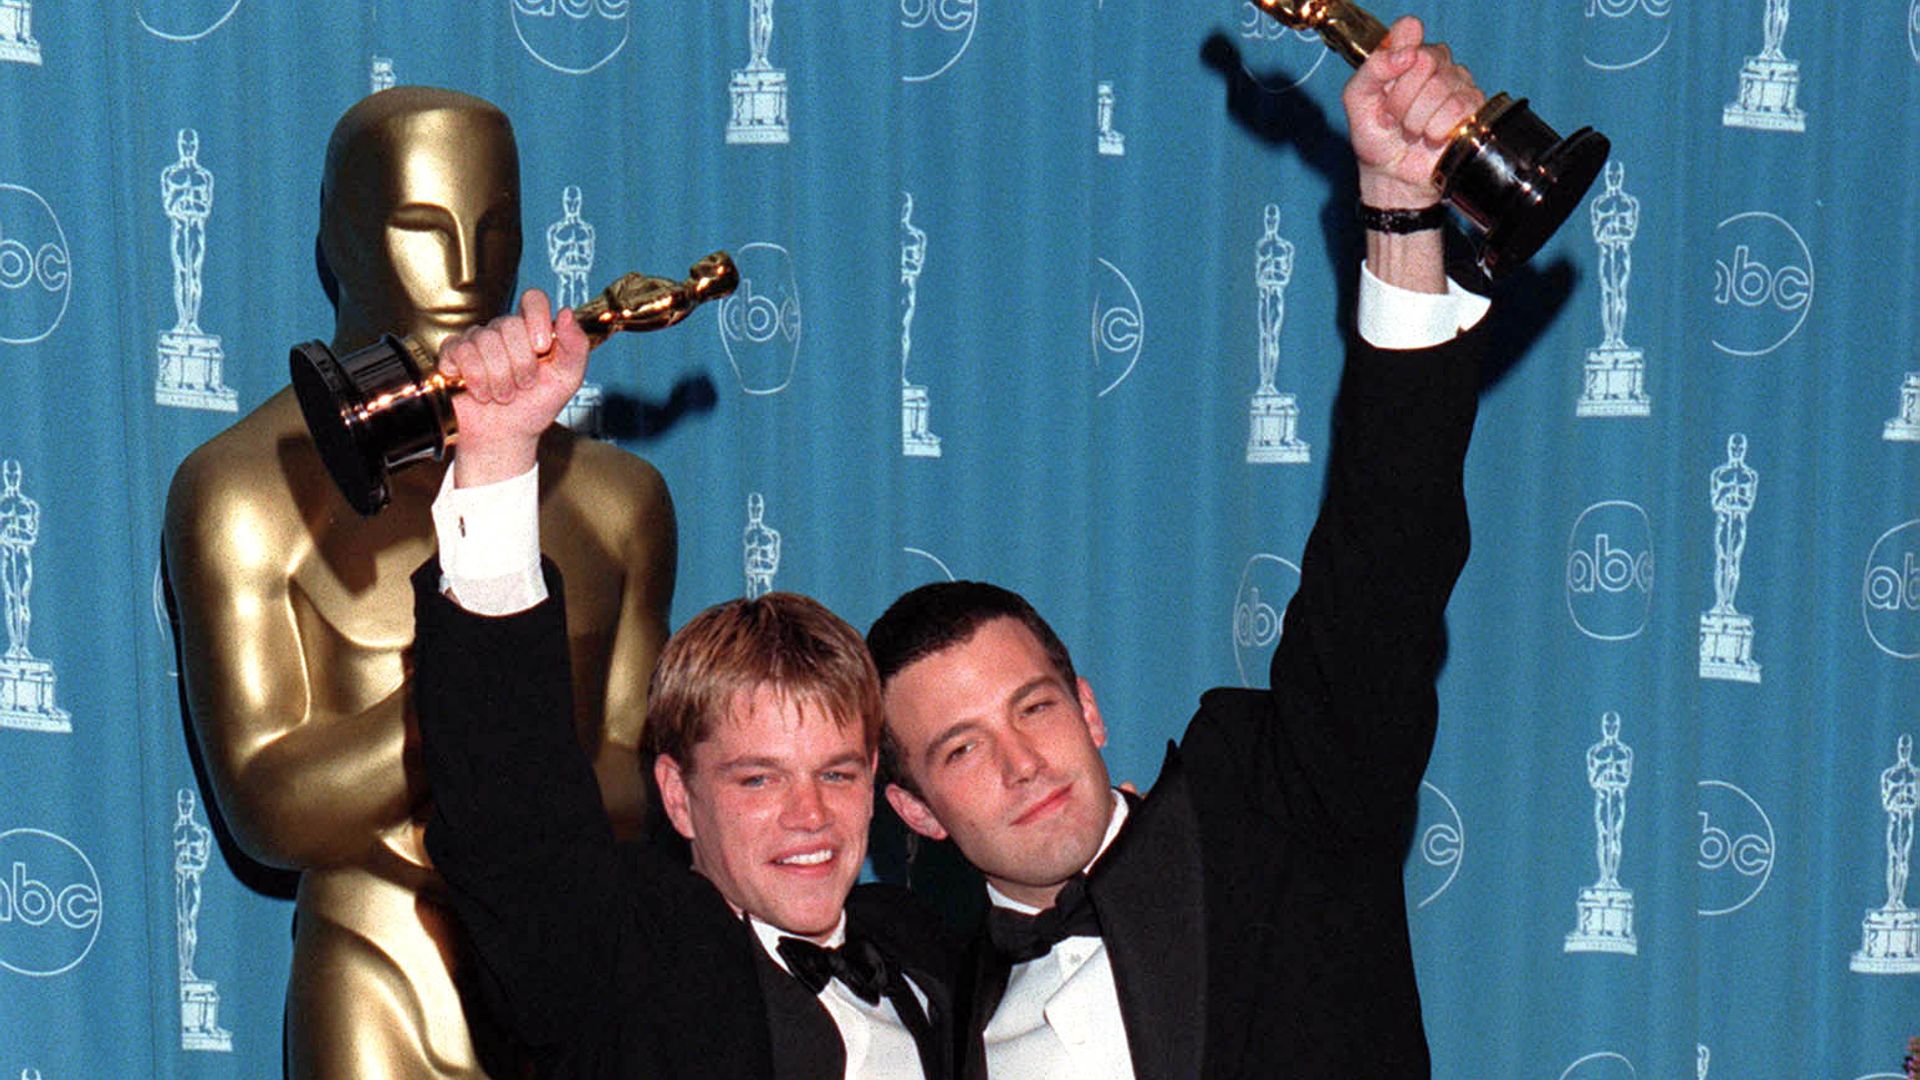 Matt Damon and Ben Affleck at the 1998 Oscars, where they won the Best Original Screenplay award for Good Will Hunting